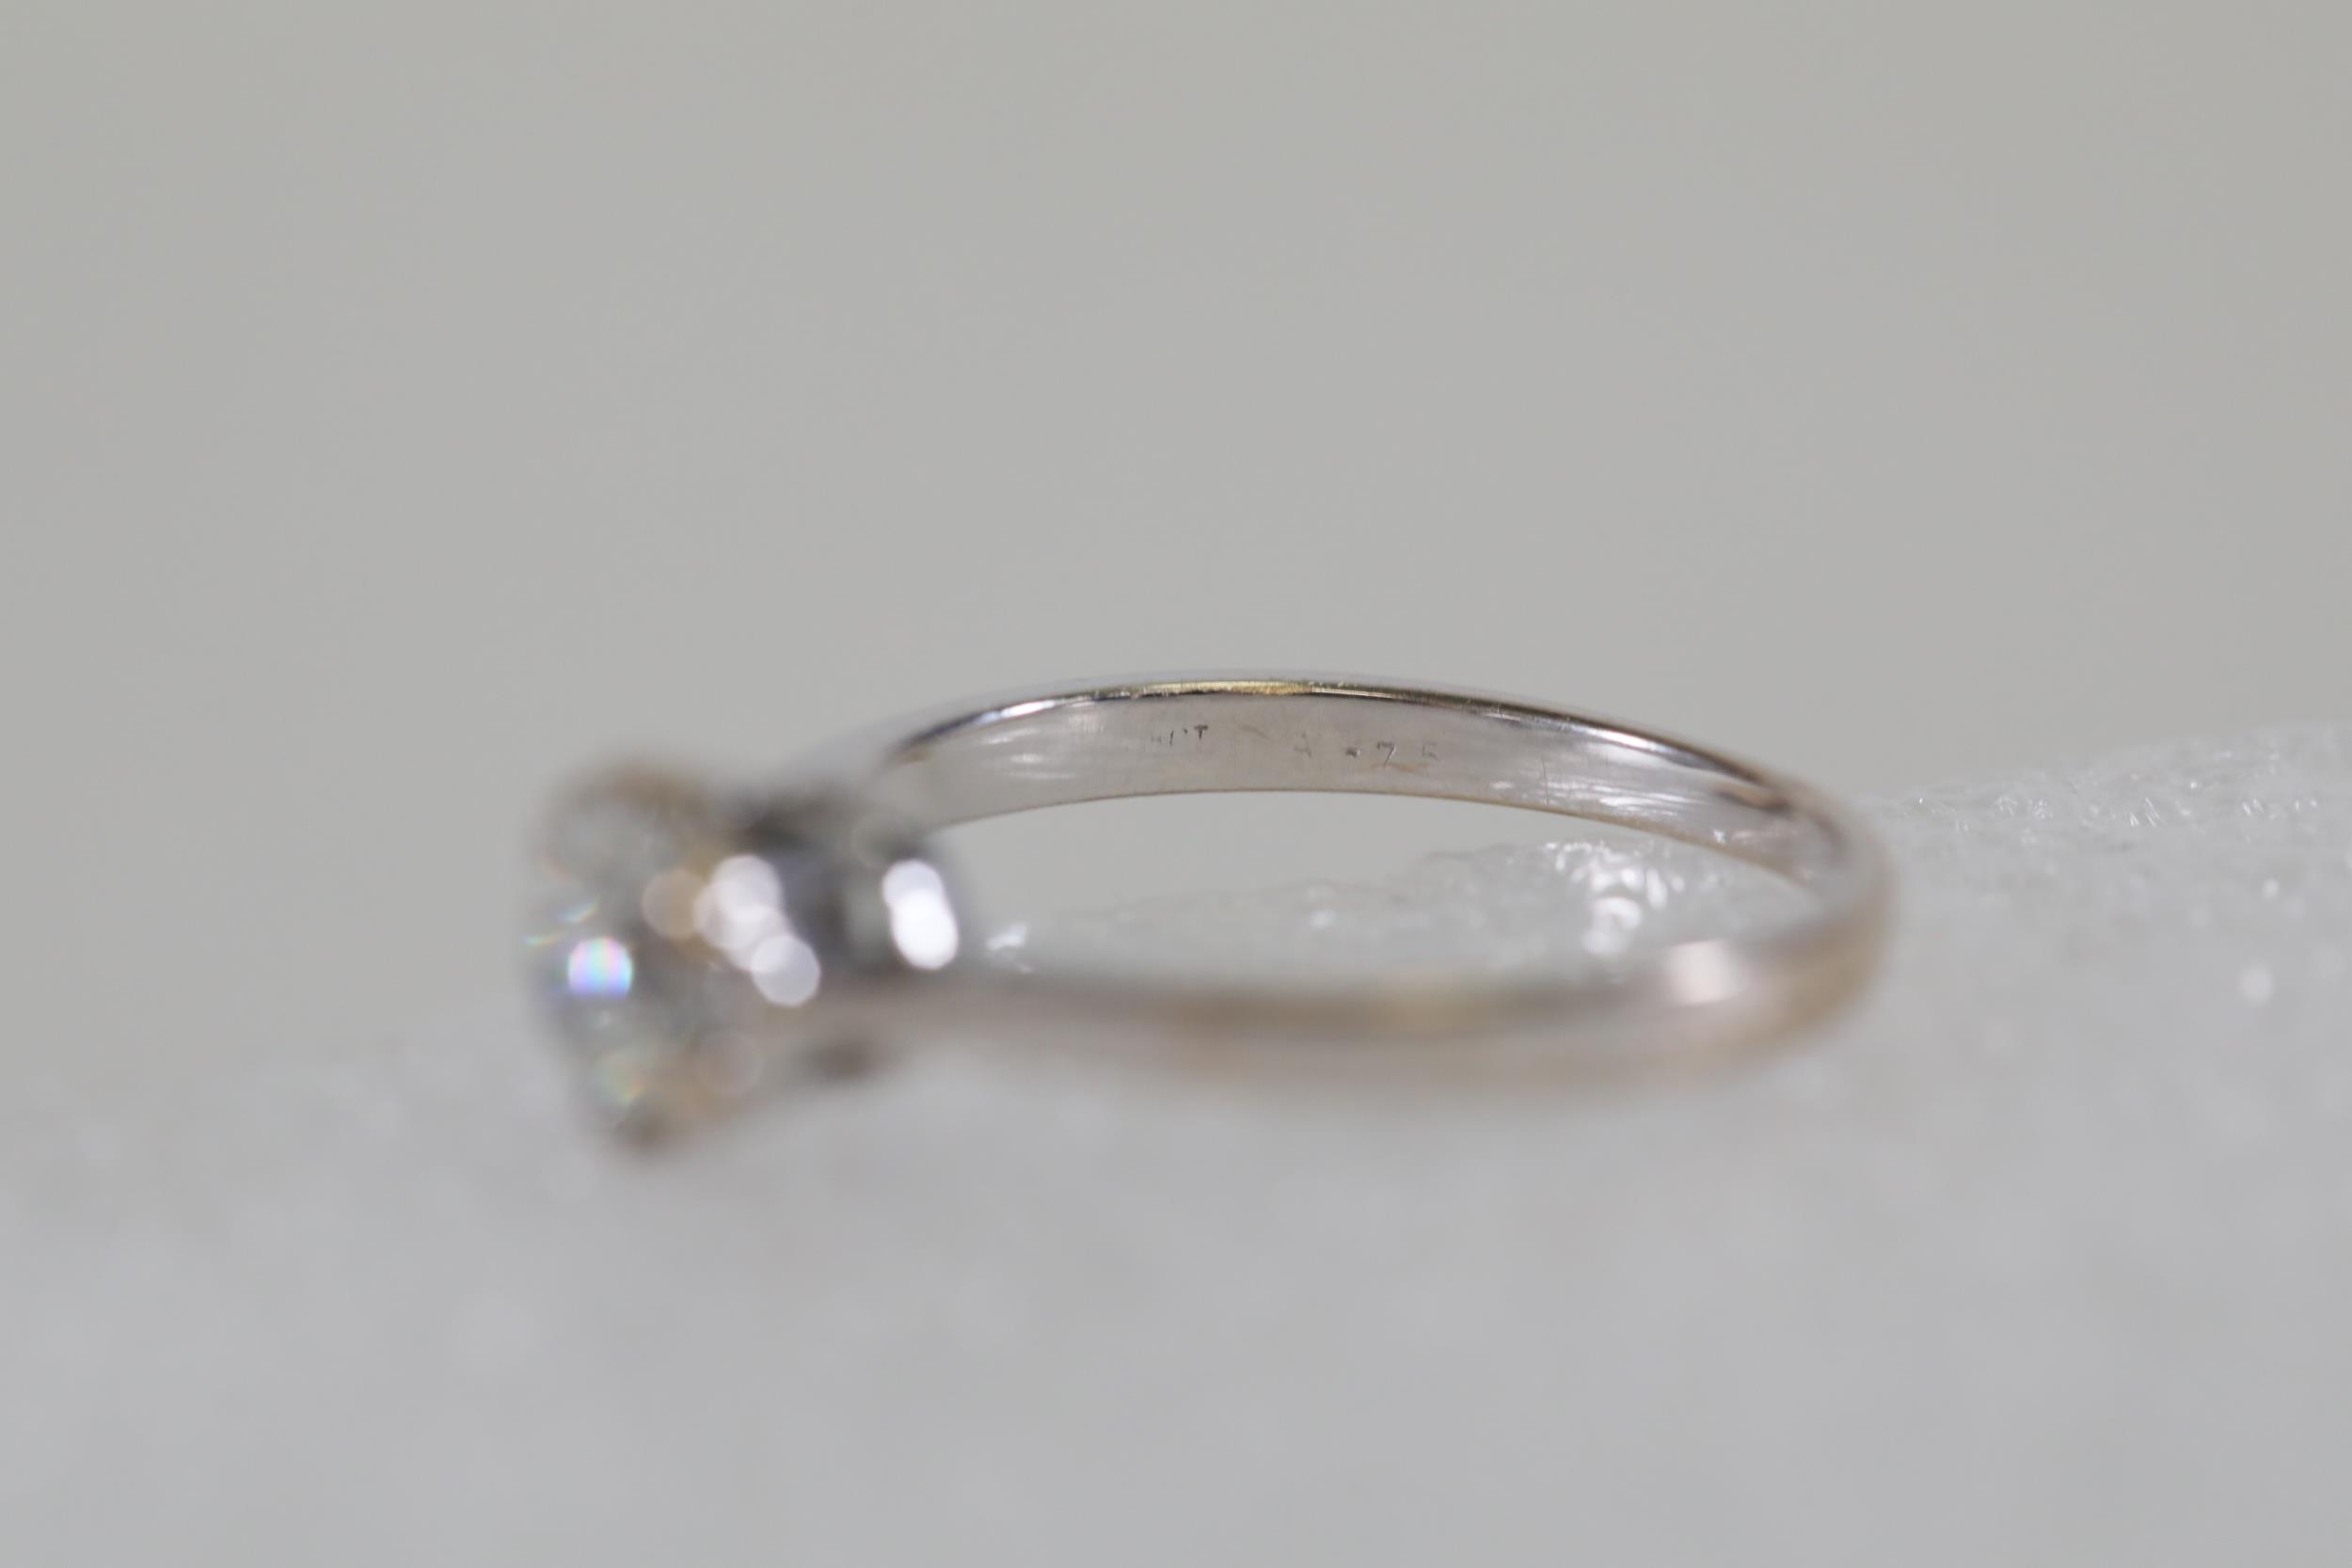 18ct White Gold Single Stone Diamond Ring 0 75ct Weight Shank 2mm Finger Size L 2 7g Total - Image 8 of 8